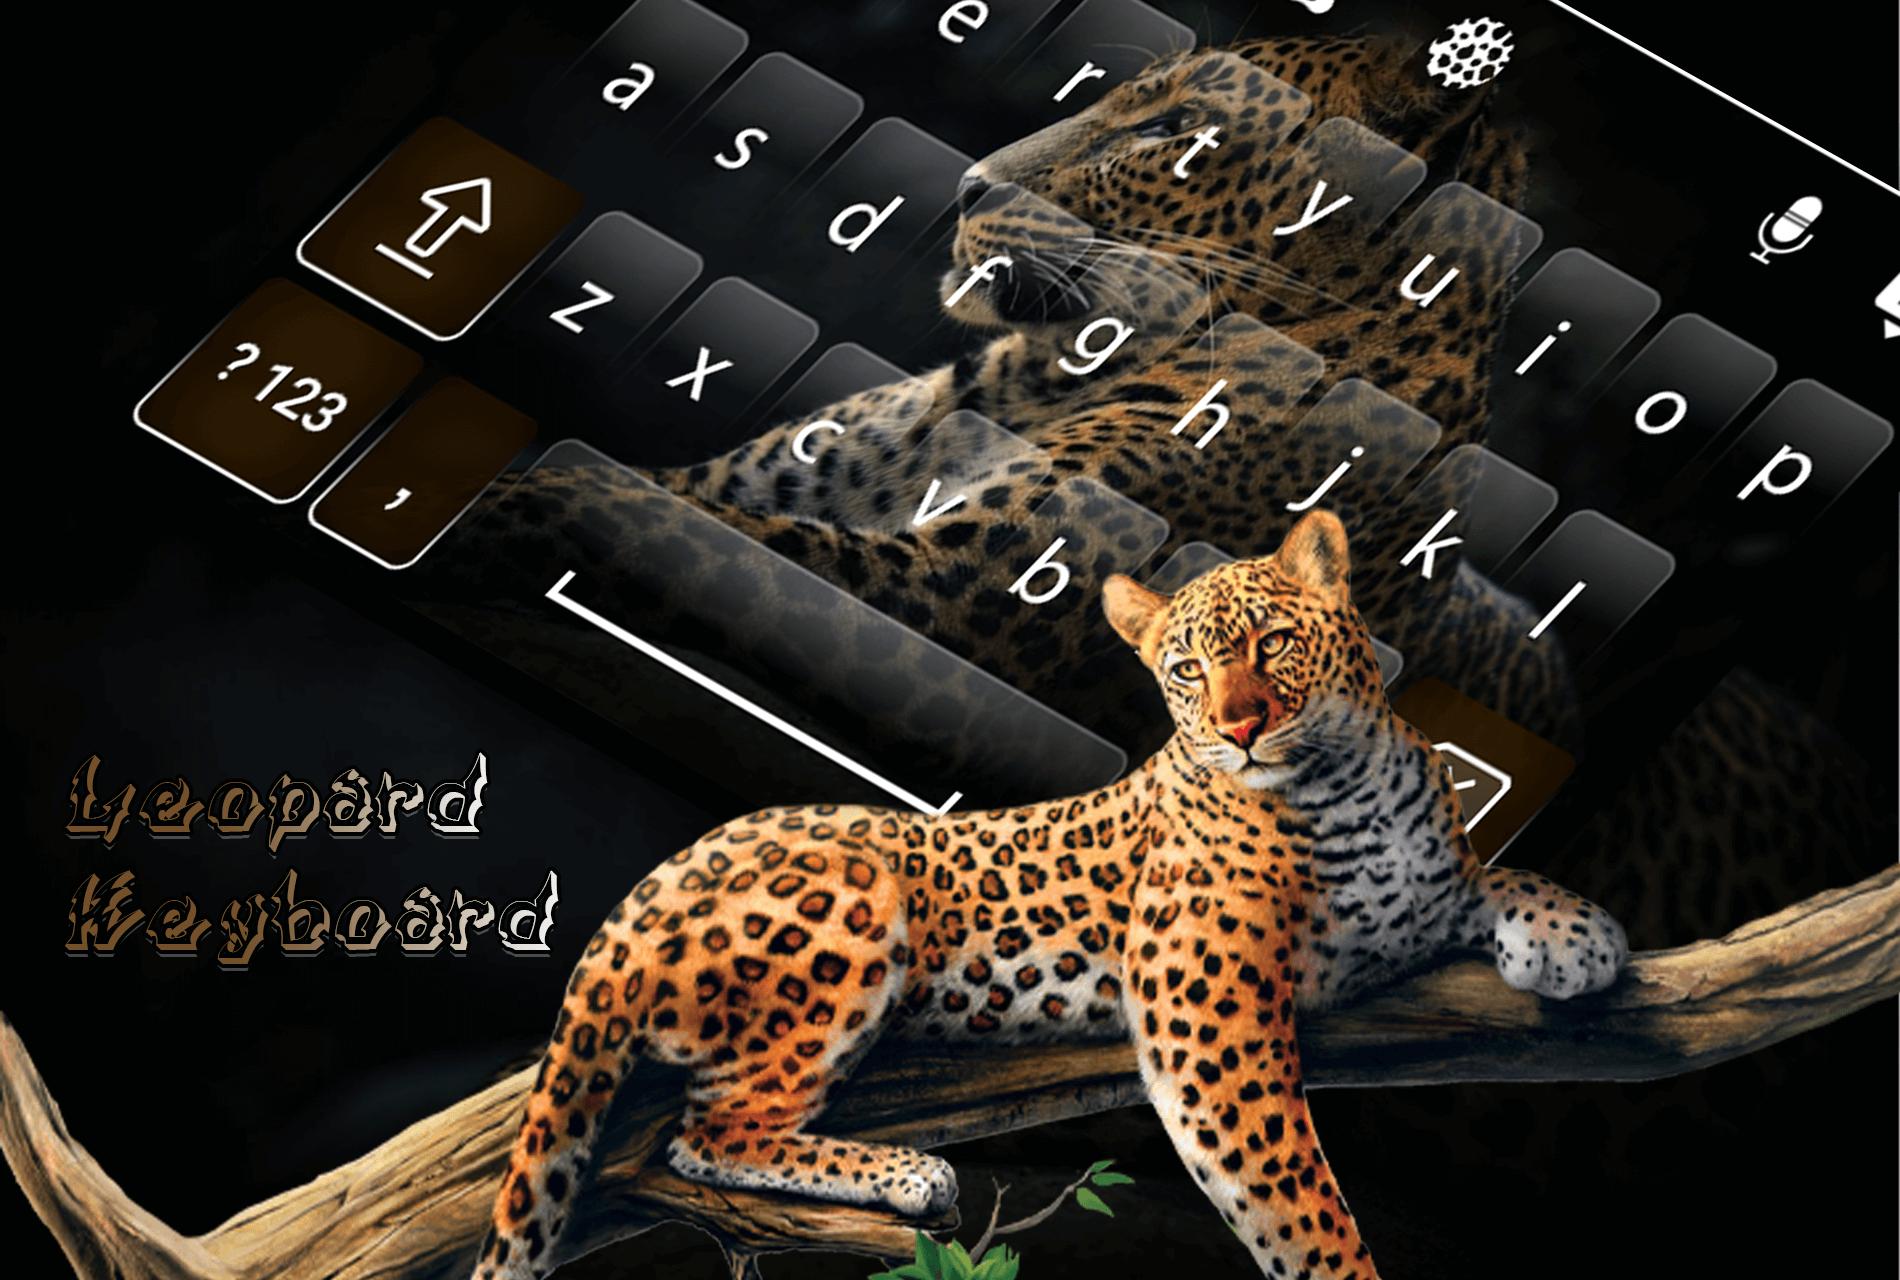 Leopard Keyboard For Android Apk Download - leopard roblox template